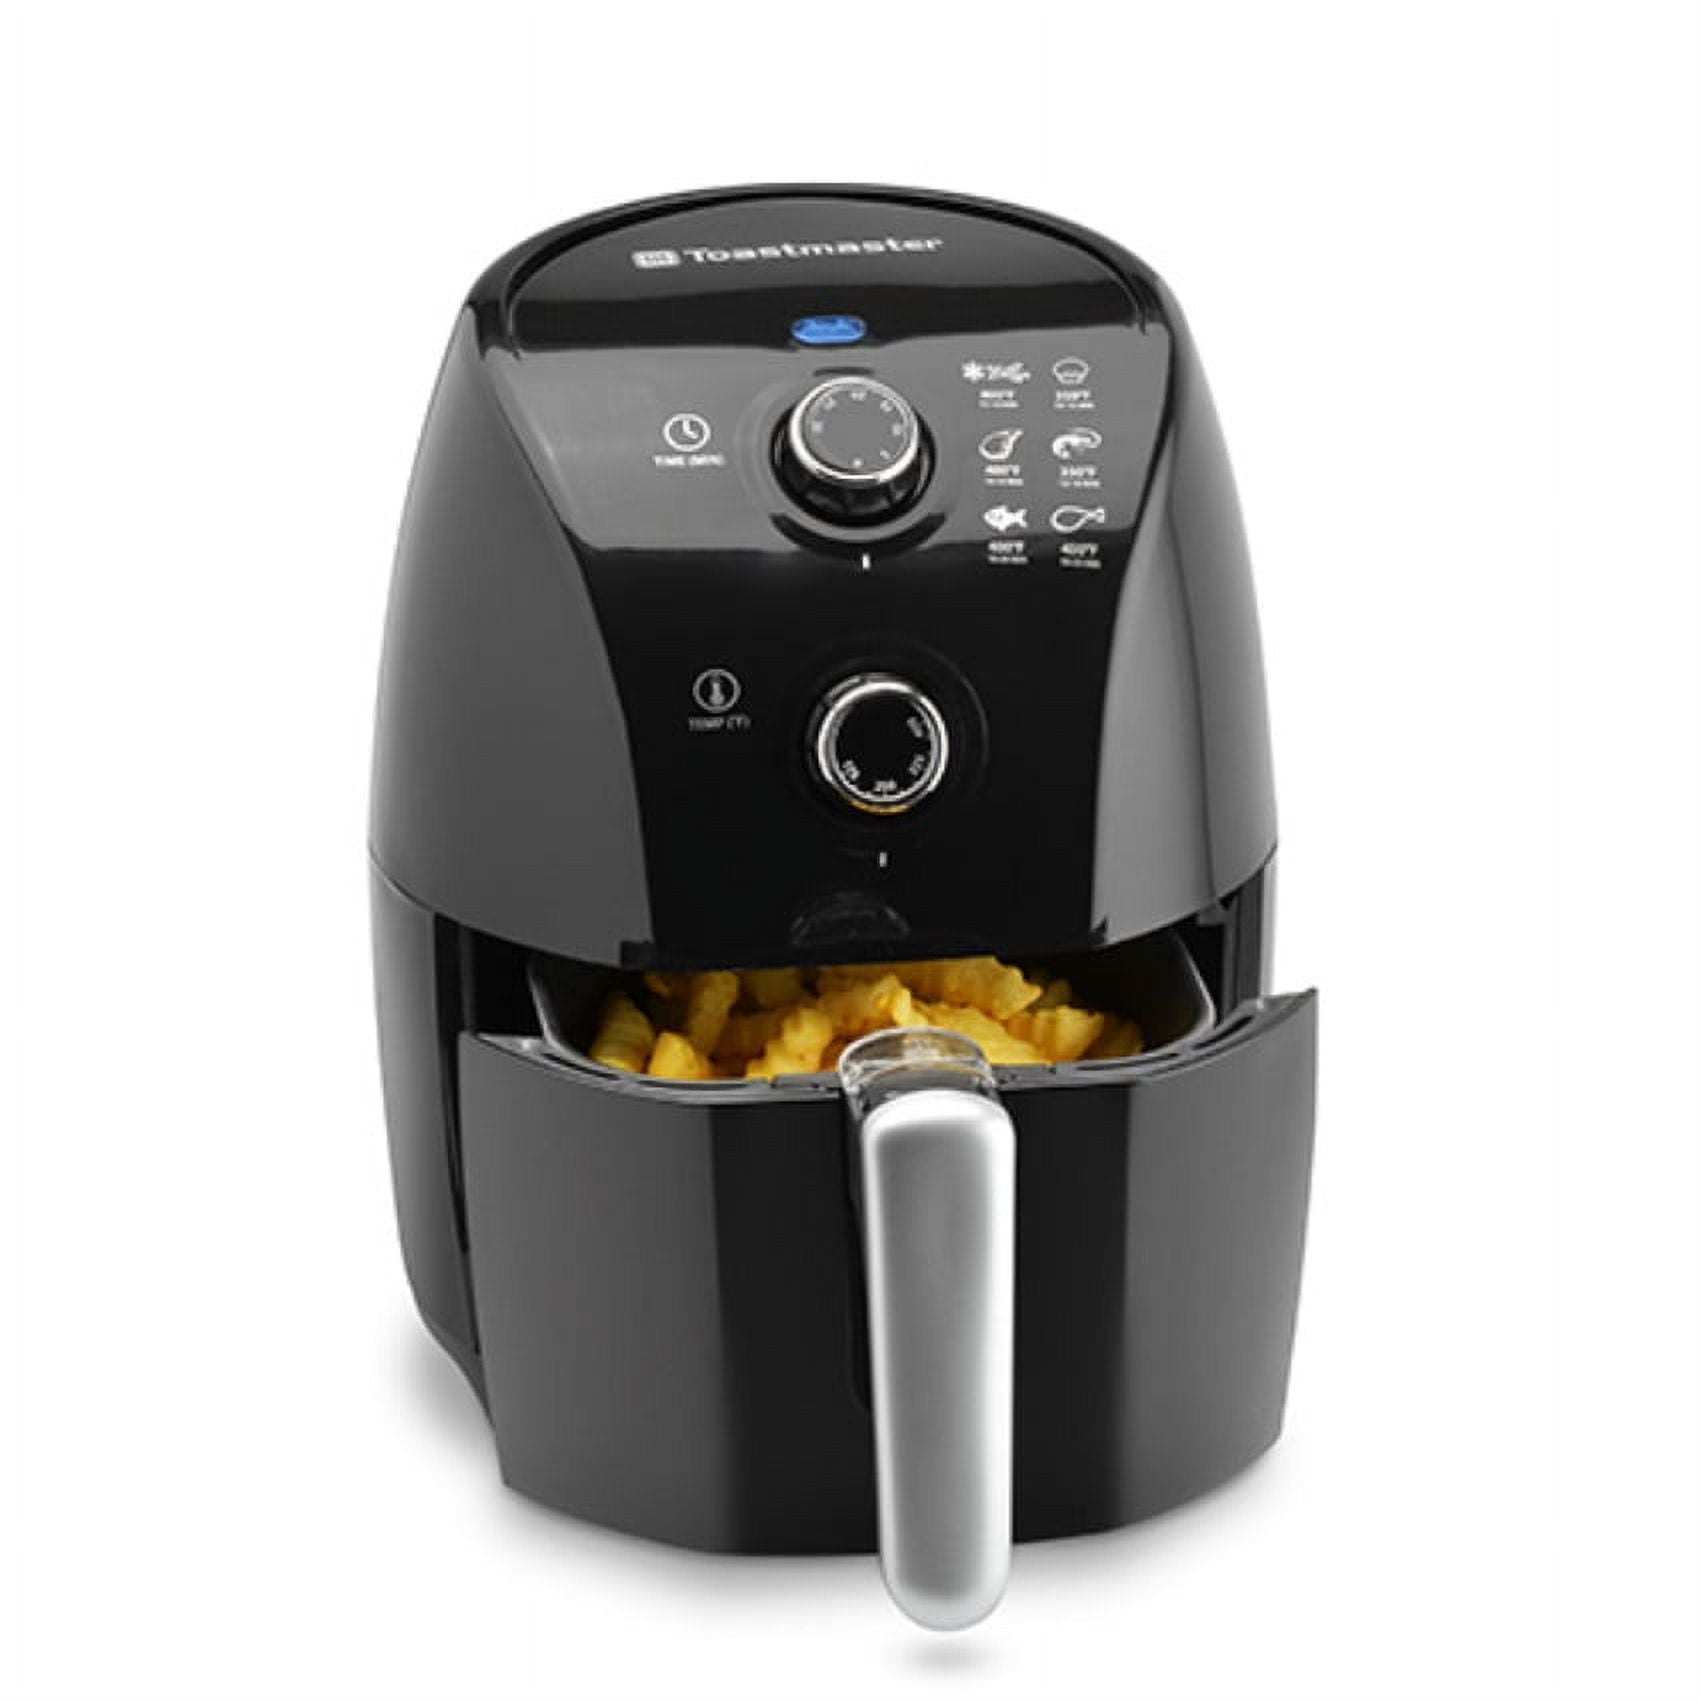 Up To 21% Off on Toastmaster 1.5 Liter Air Fryer